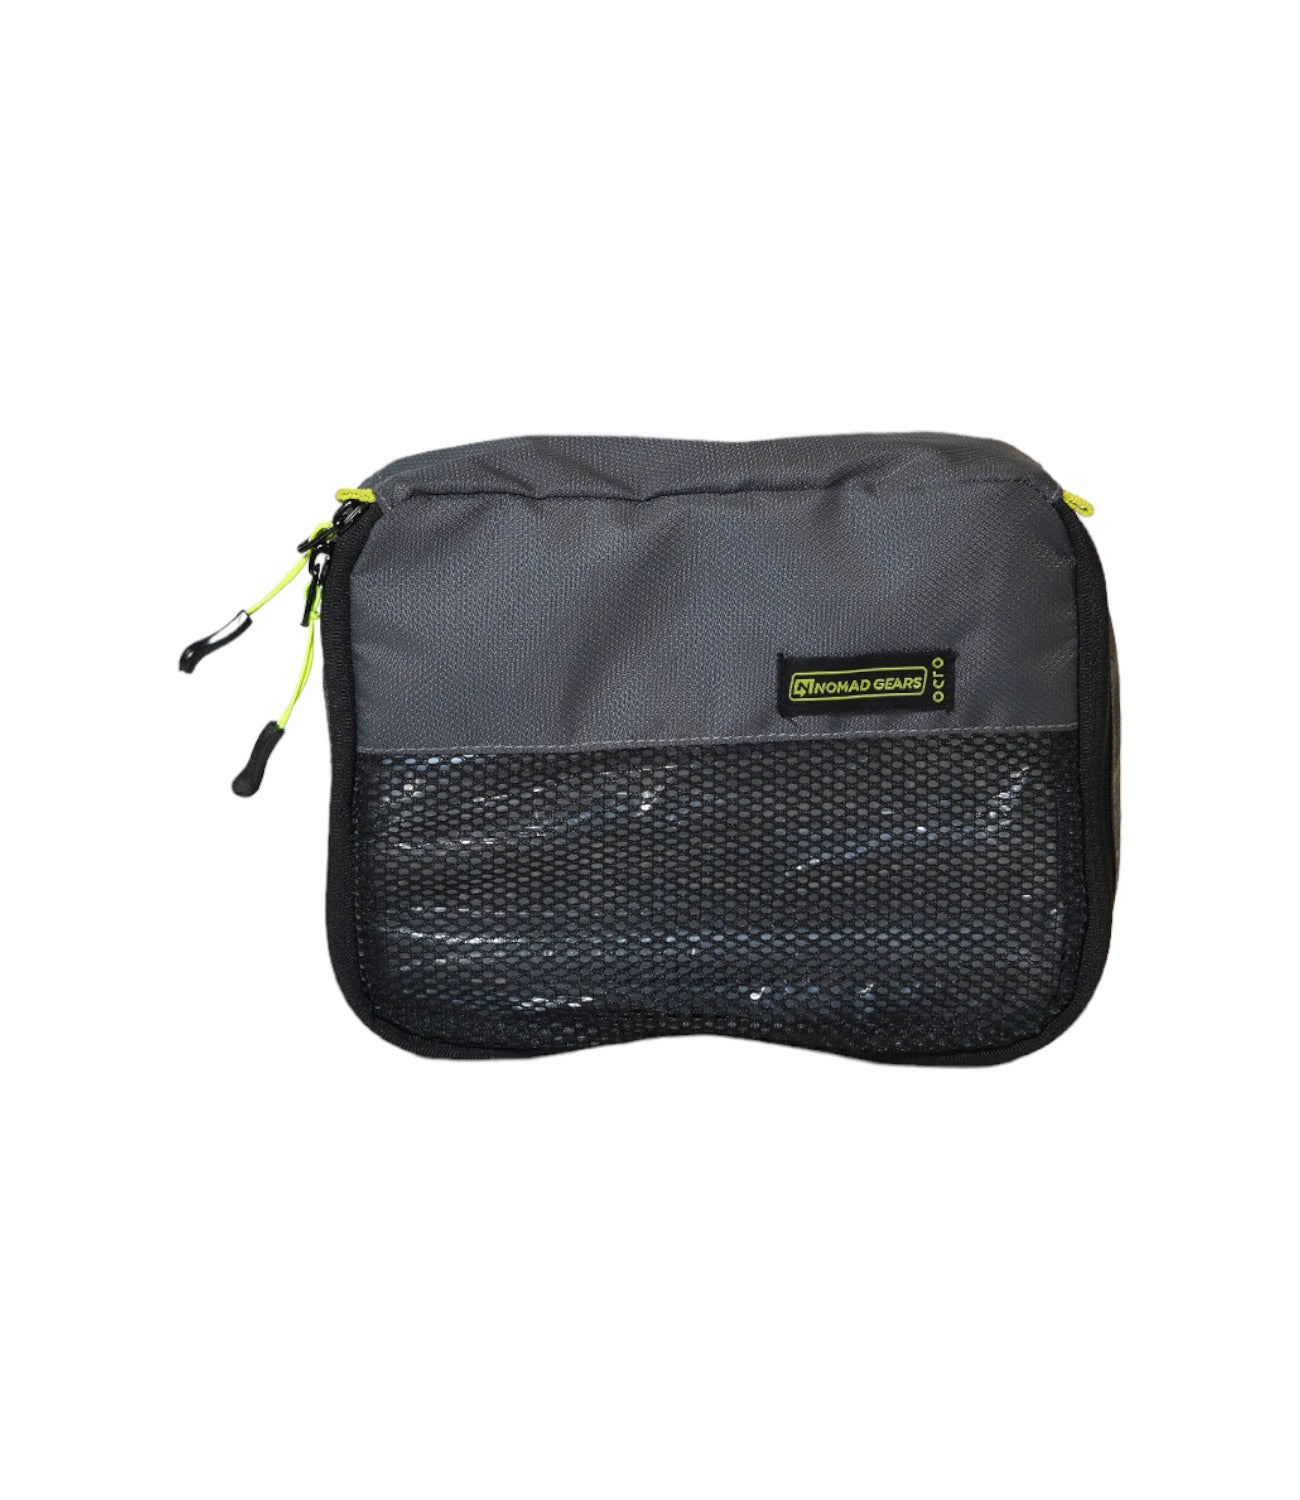 Nomad Gears Octo Packing Cubes